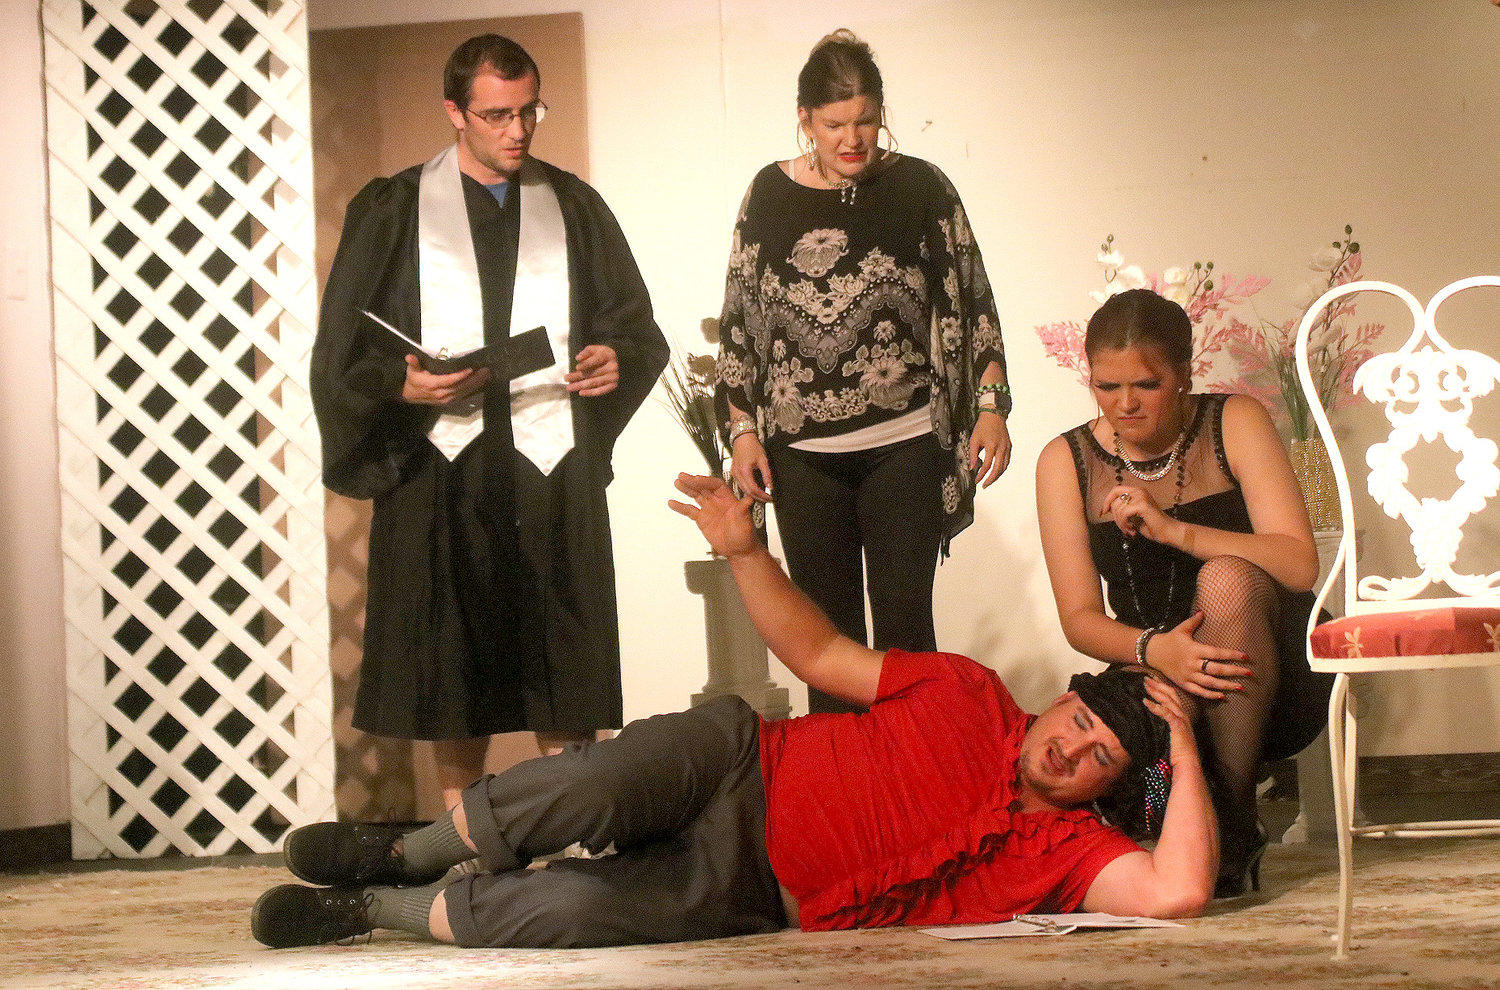 Ty Clute playing "Raul" holds on after a dastardly deed at a wedding rehearsal in OFP's 'As Long As We Both Shall Live" playing at the Fort Madison playhouse starting this weekend. Photo by Chuck Vandenberg/PCC